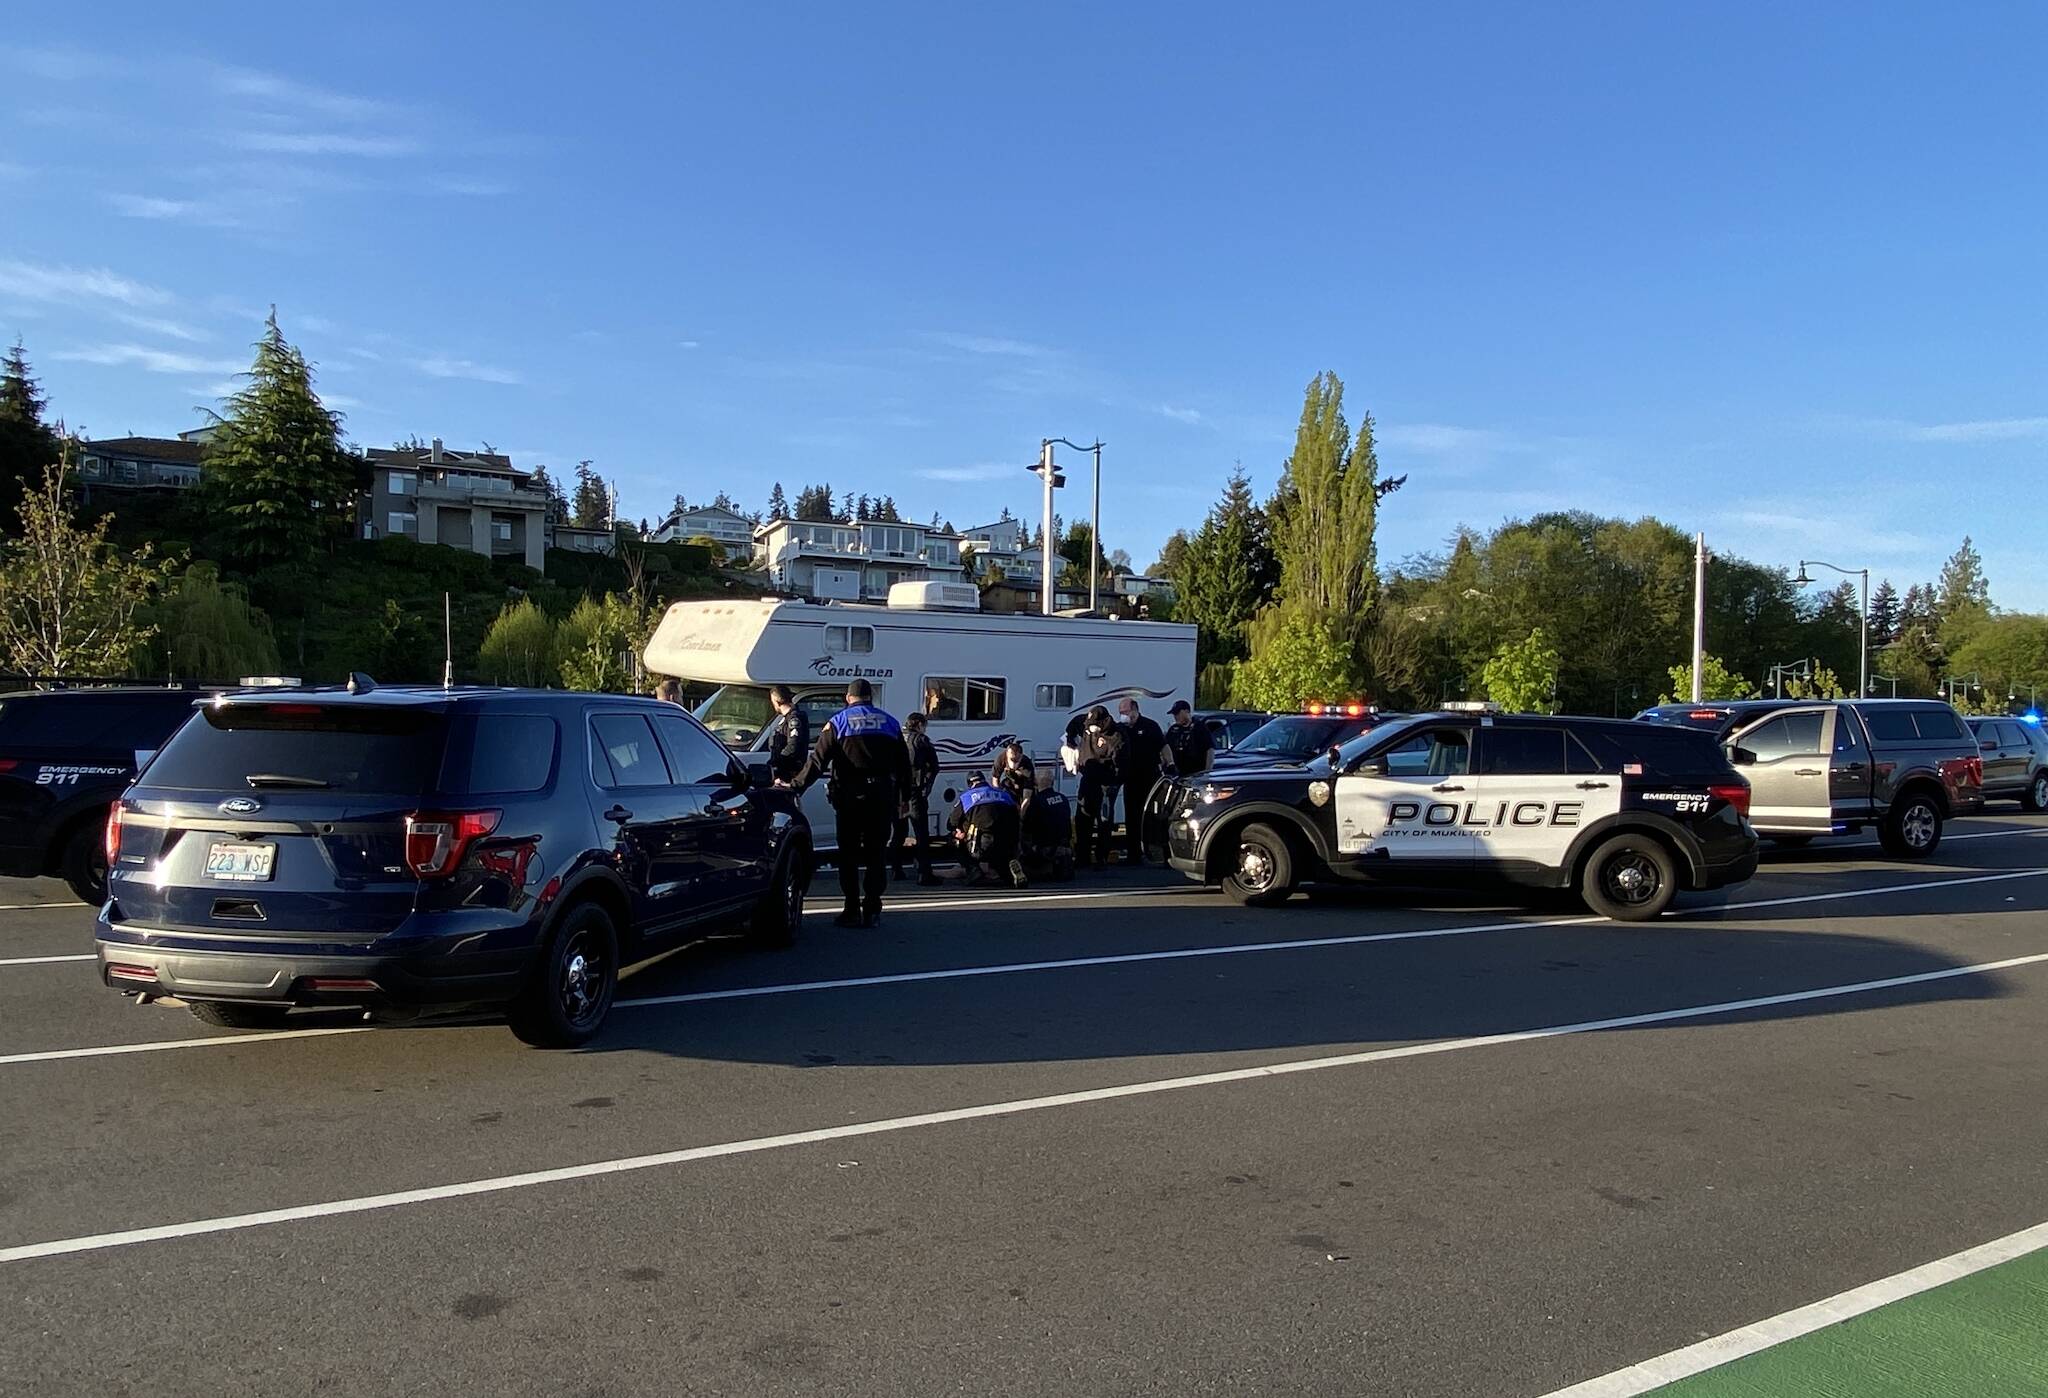 Officers respond to a ferry traffic disturbance Tuesday after a woman in a motorhome threatened to drive off the dock, authorities said. (Photo provided by Mukilteo Police Department)